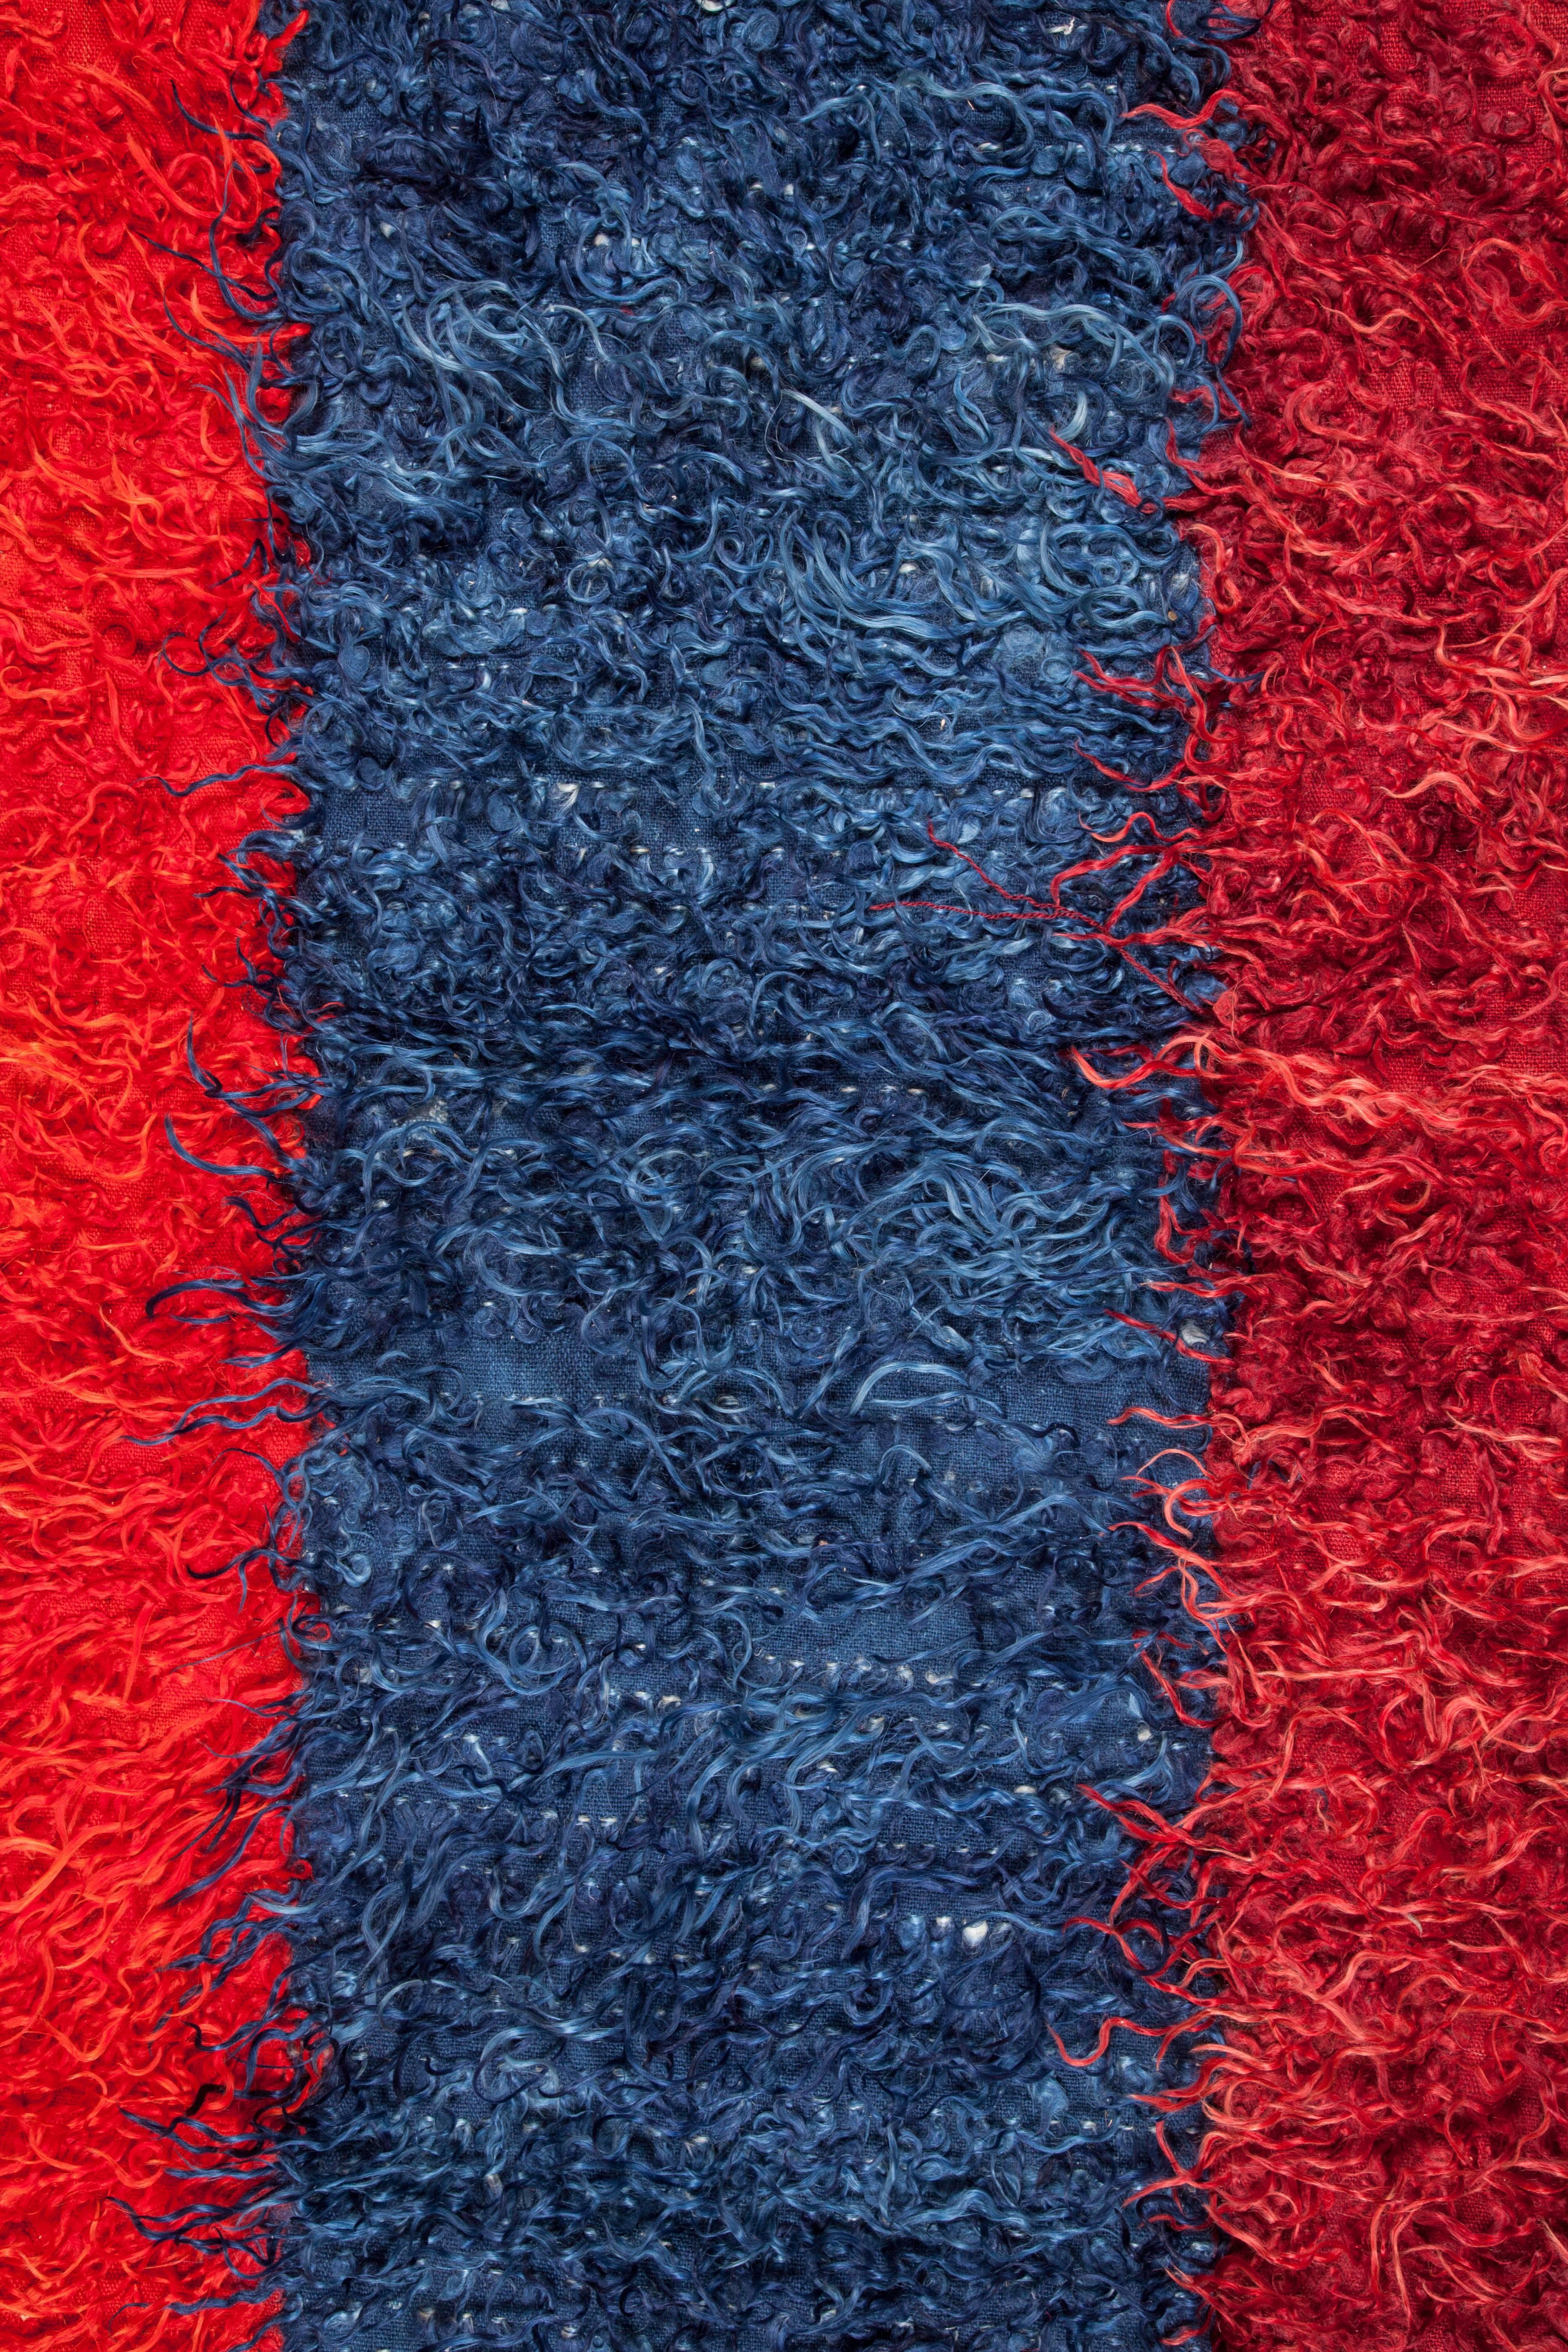 Filikli Rugs are iconic weavings by the nomads of Central Anatolia. Usually sheeps wool is used for the background warp and weft structure and the knots are of angora. These are colourful, silky nomadic weavings mainly made for the families’